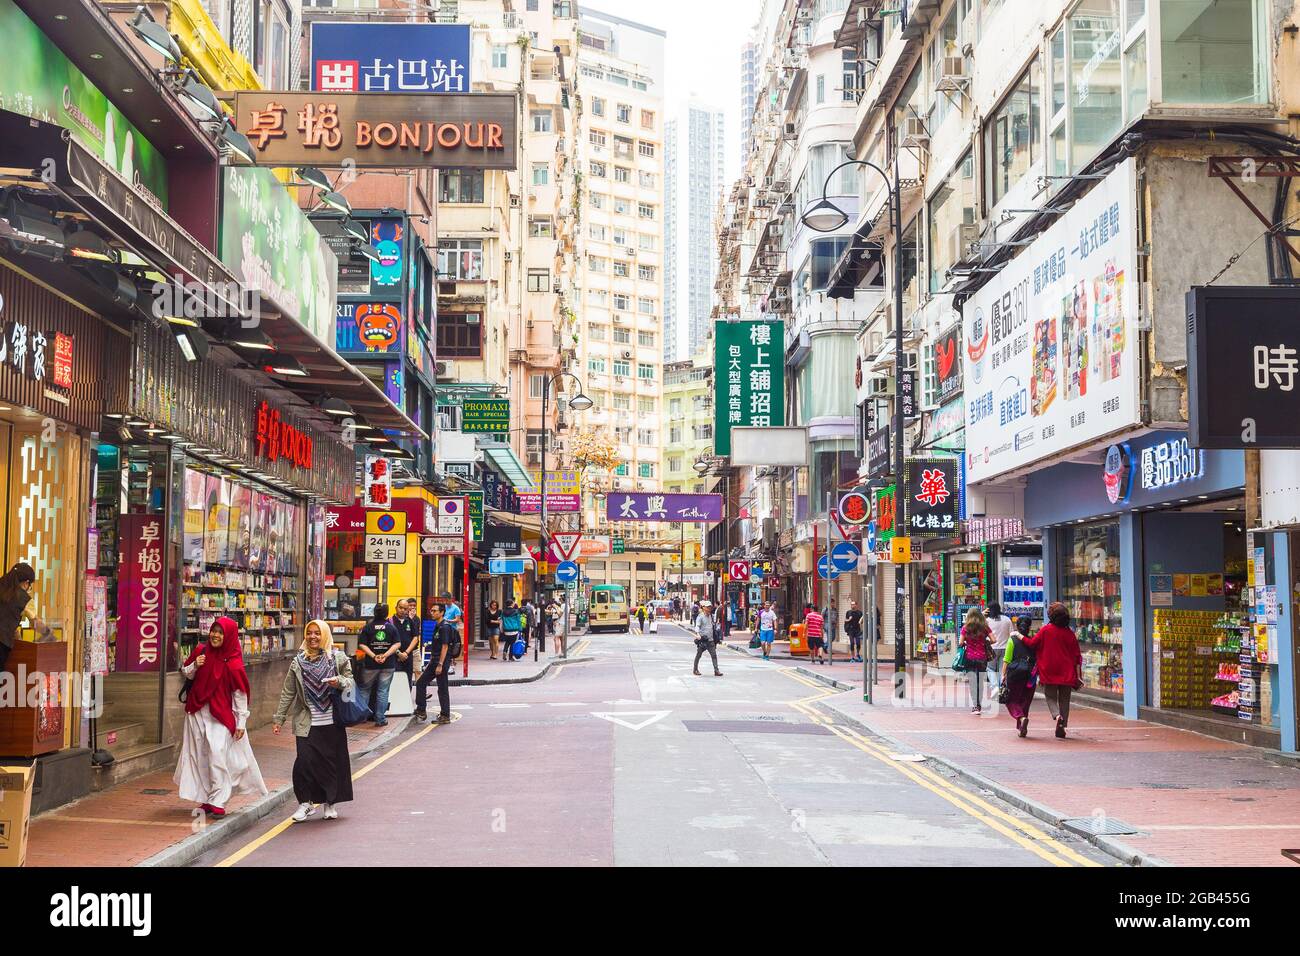 HONG KONG - 9TH APRIL 2017: Streets of Hong Kong during the day showing typical facades and architecture. A person can be seen crossing the road. Stock Photo